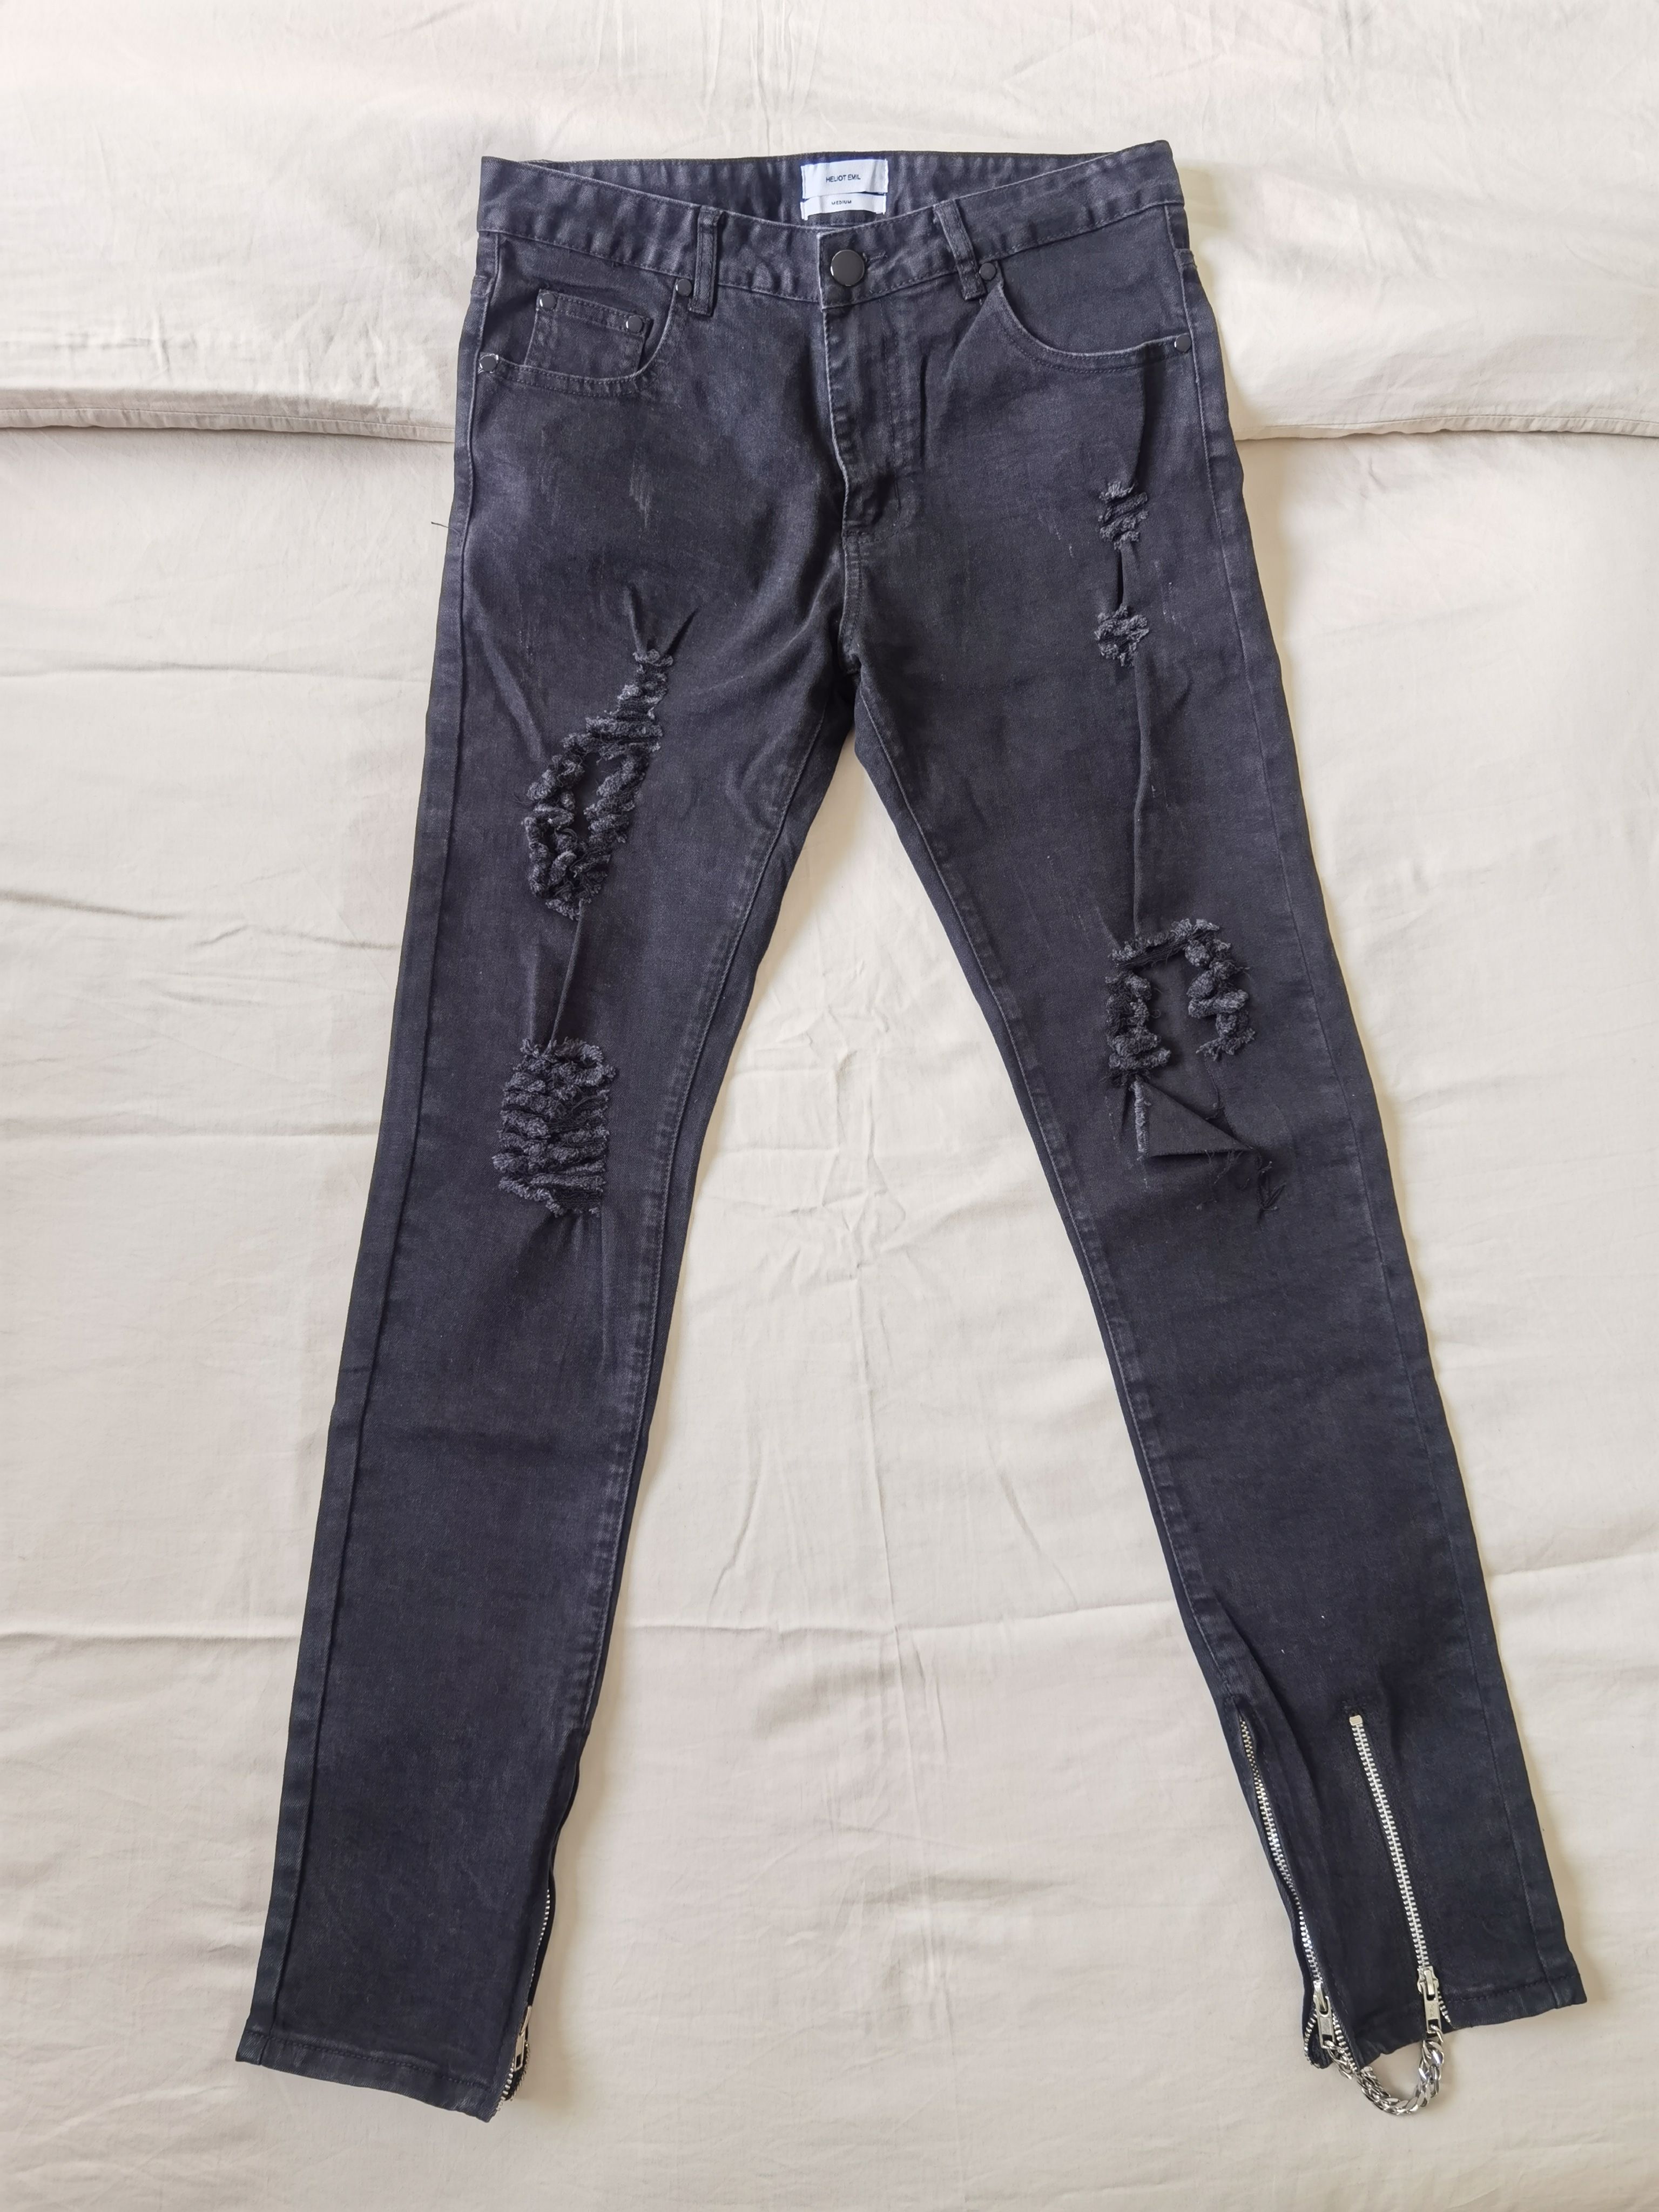 Heliot Emil Ripped Denim Pants with side Zippers - 15